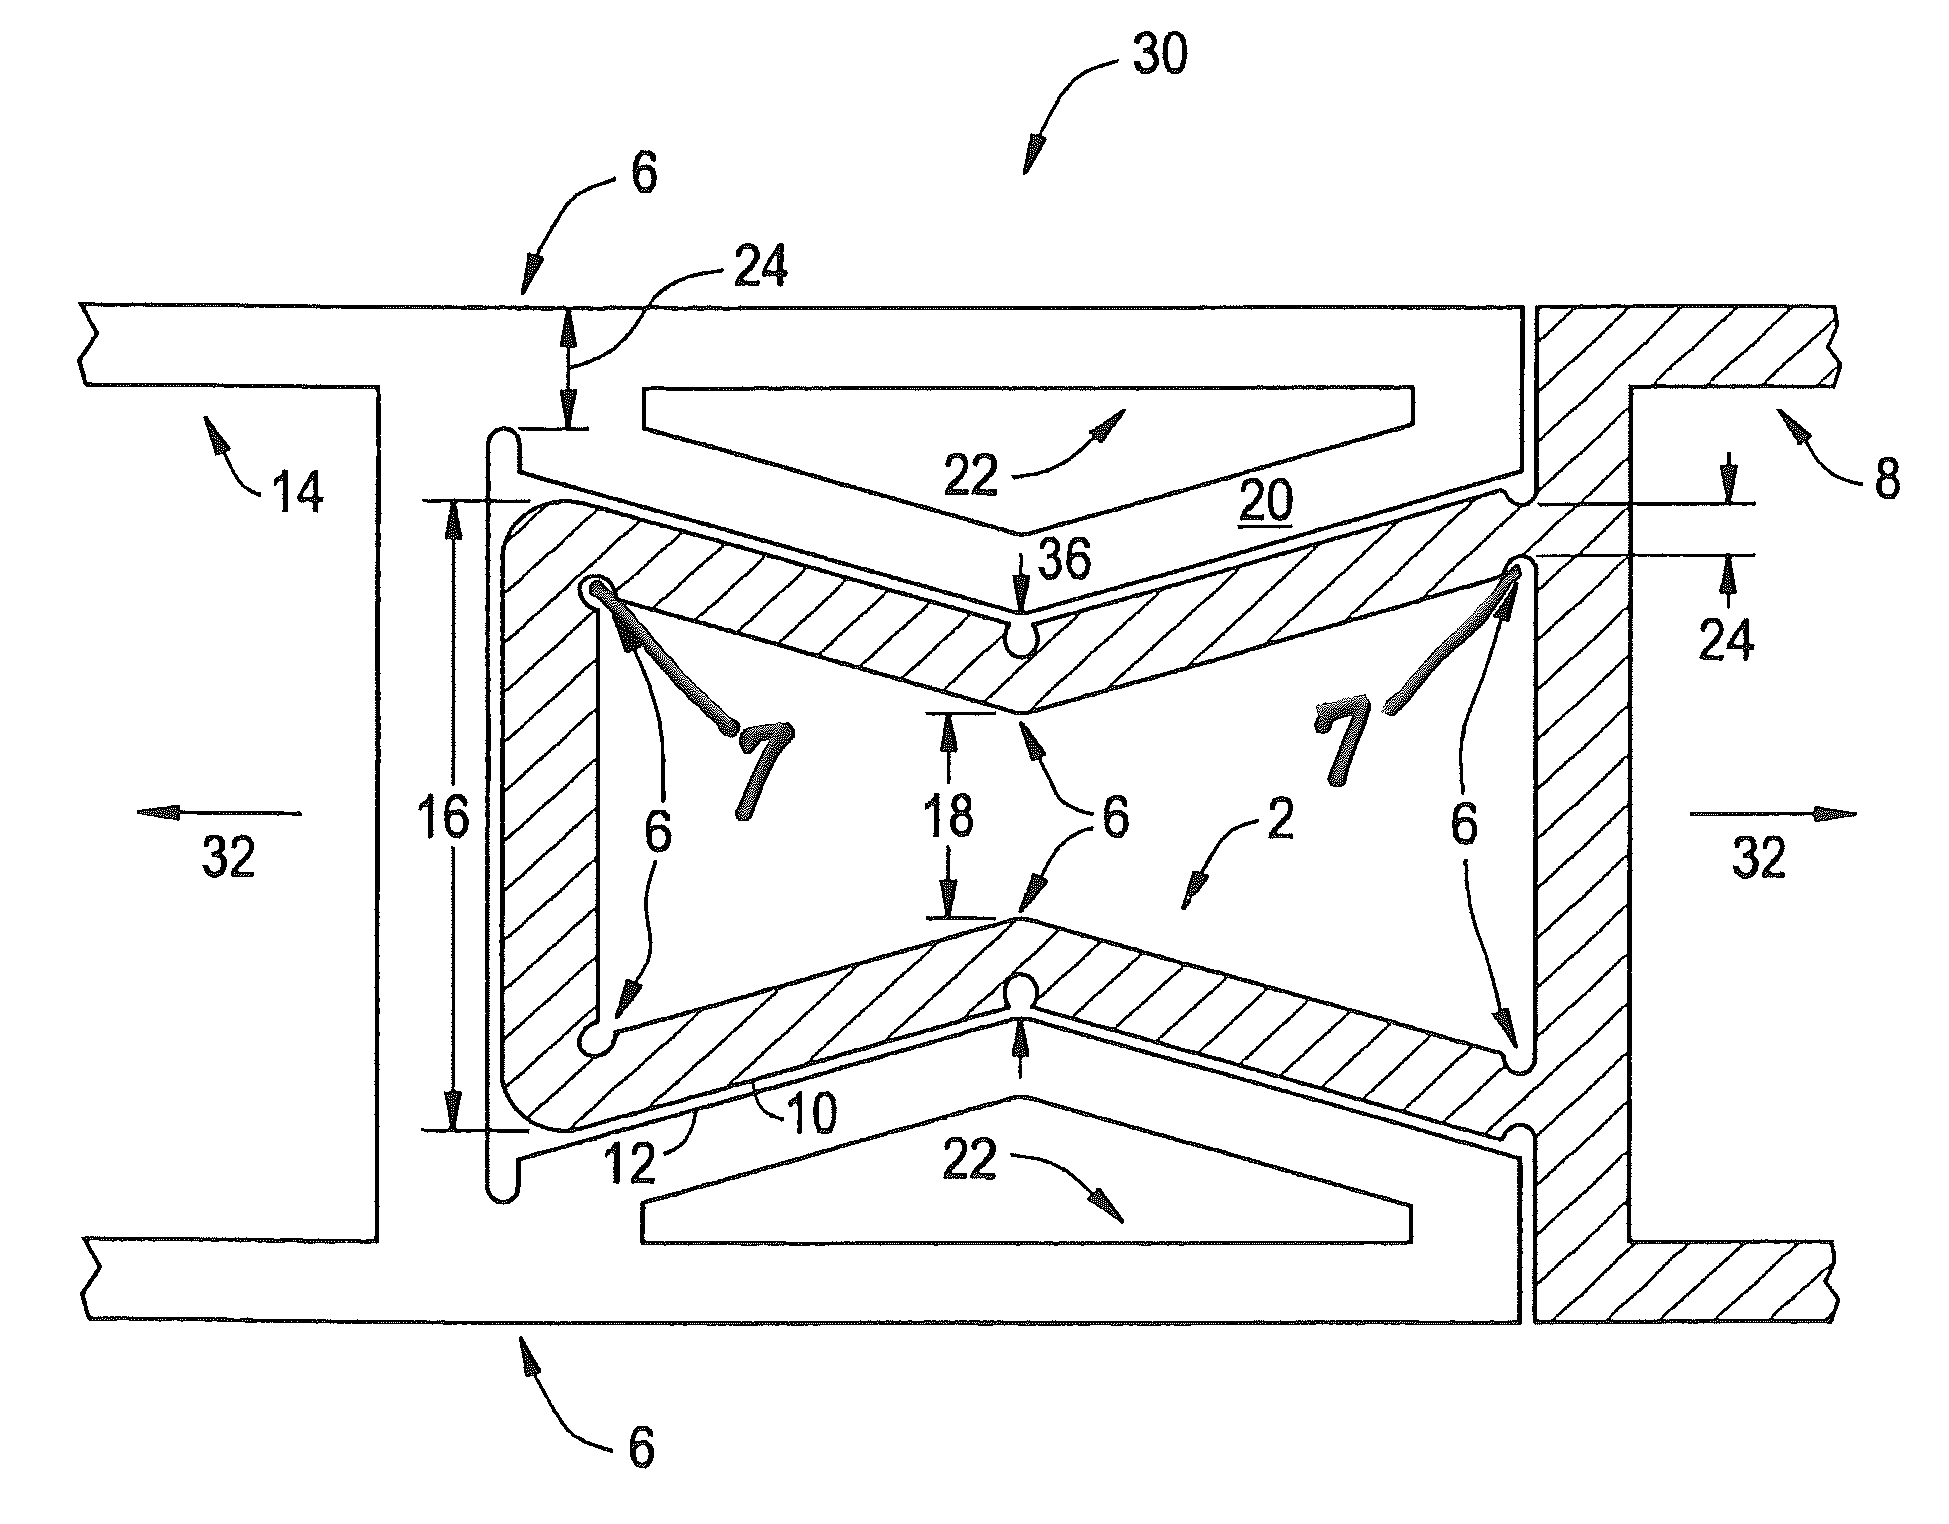 Apparatus for connecting panels